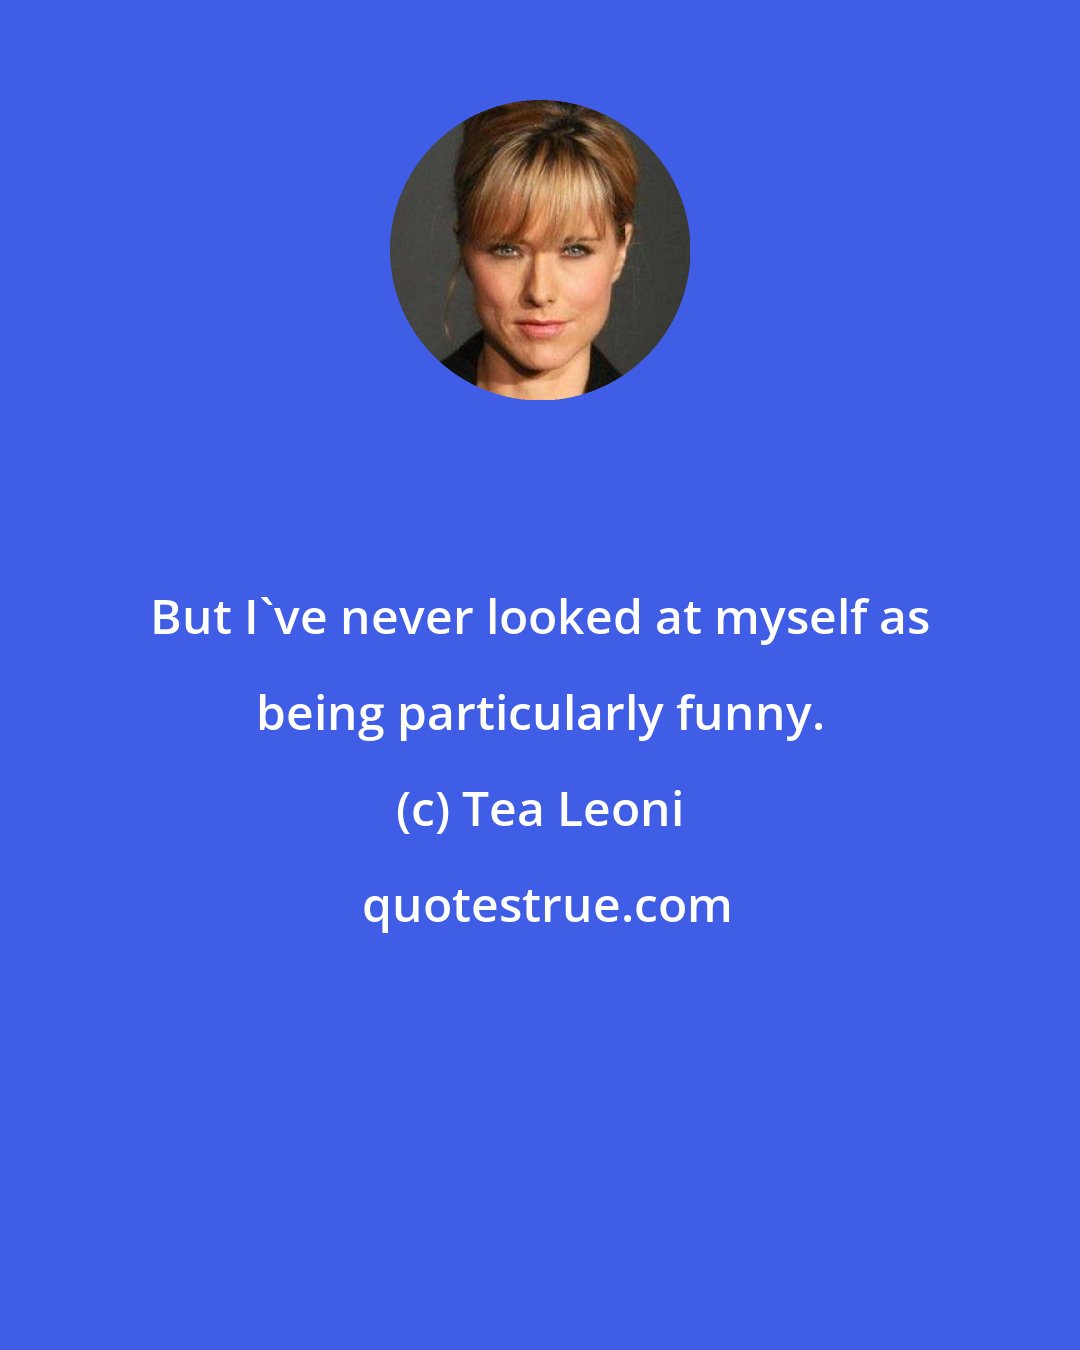 Tea Leoni: But I've never looked at myself as being particularly funny.